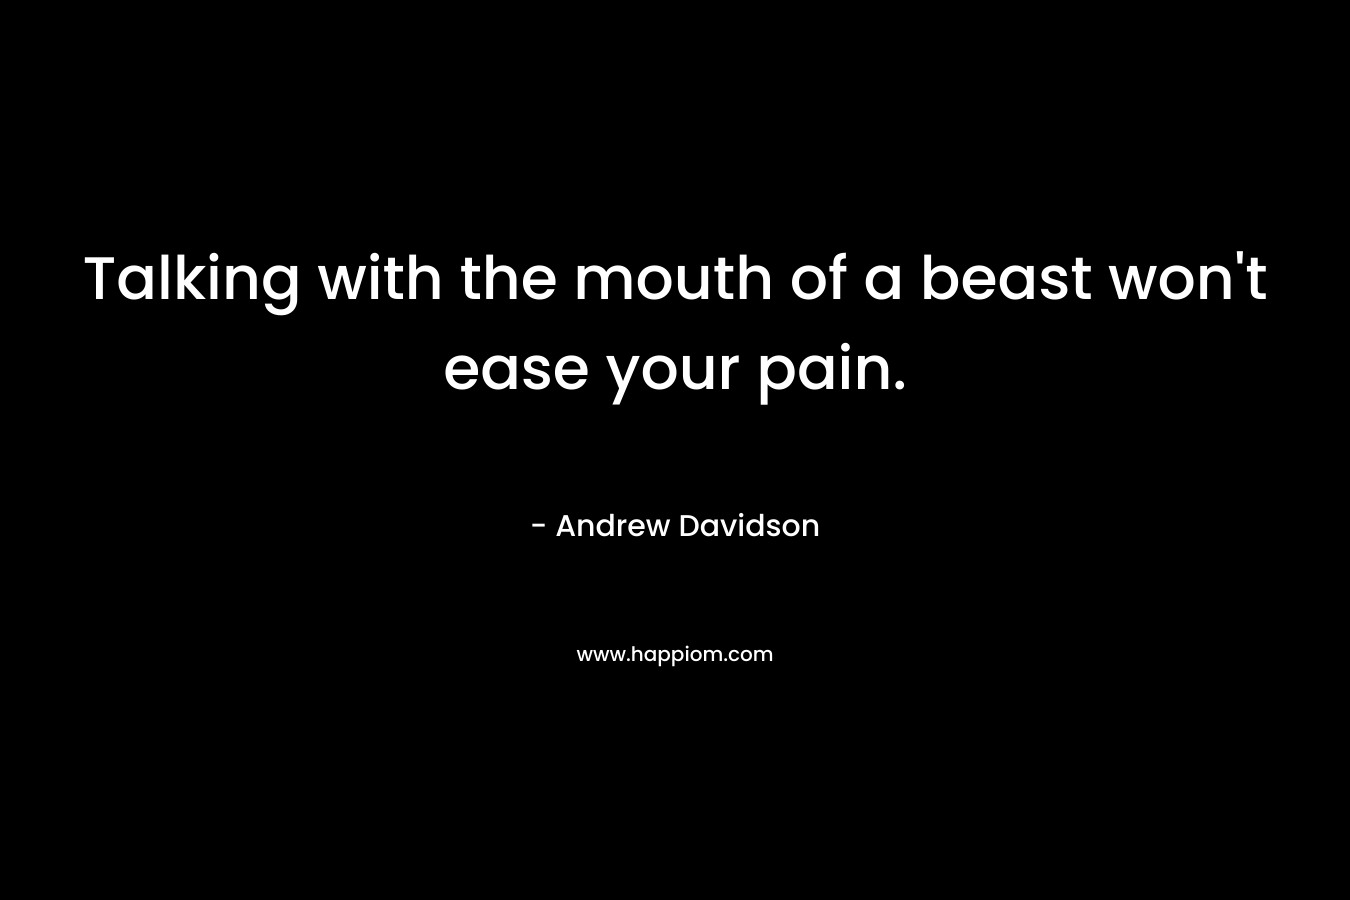 Talking with the mouth of a beast won't ease your pain.